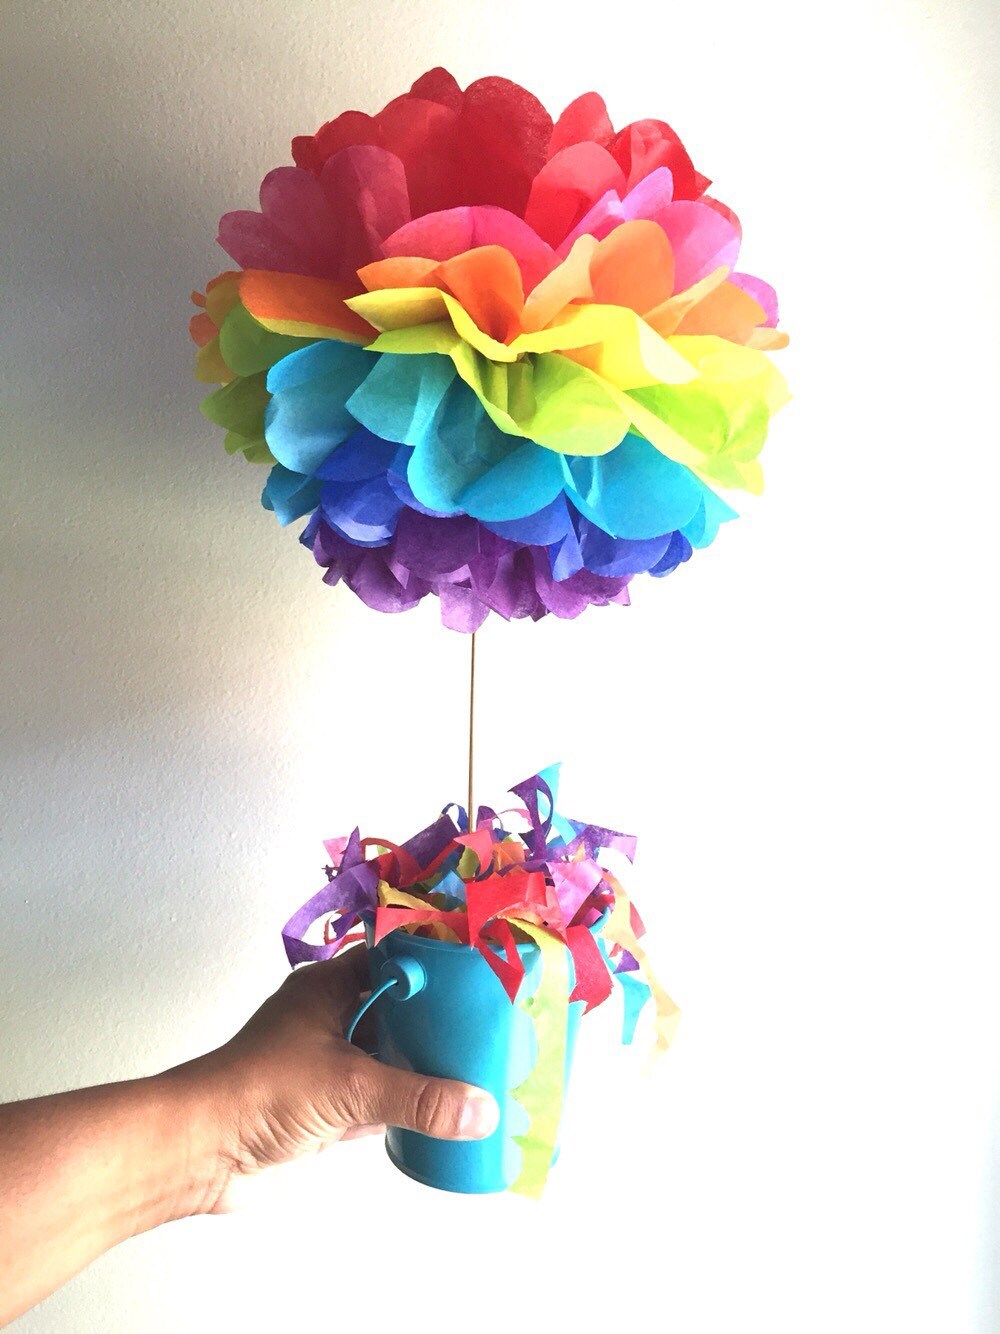 Rainbow Party Decorations for Birthday, Include Tissue Pom Pom Flowers,  Paper Fa 705353030925